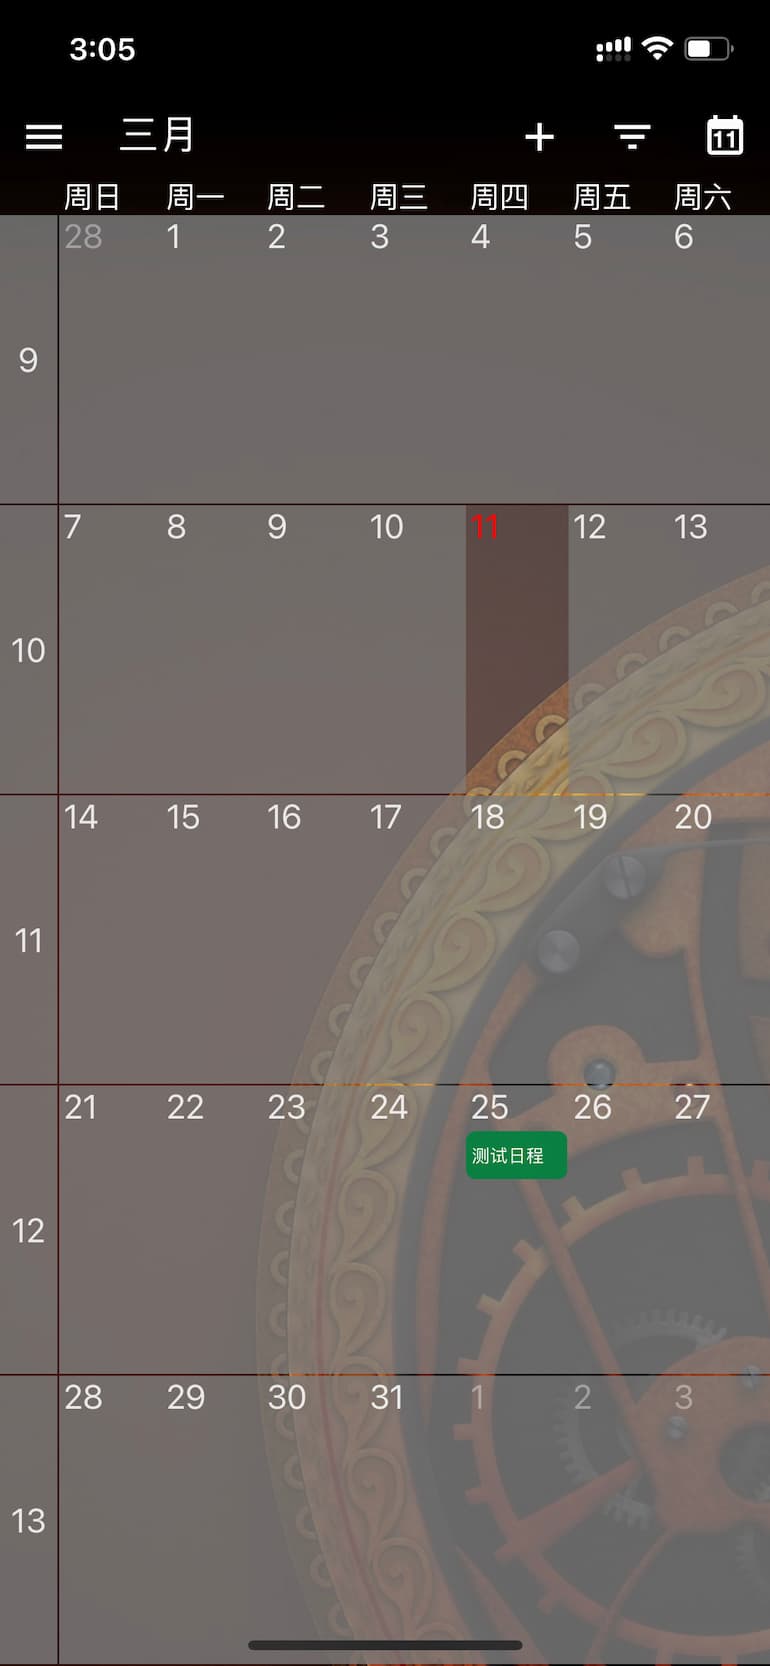 One Calenda‪r‬ - 支持 12 种日历账户，可显示任务的聚合型日历工具[Win/macOS/iPhone/Android]